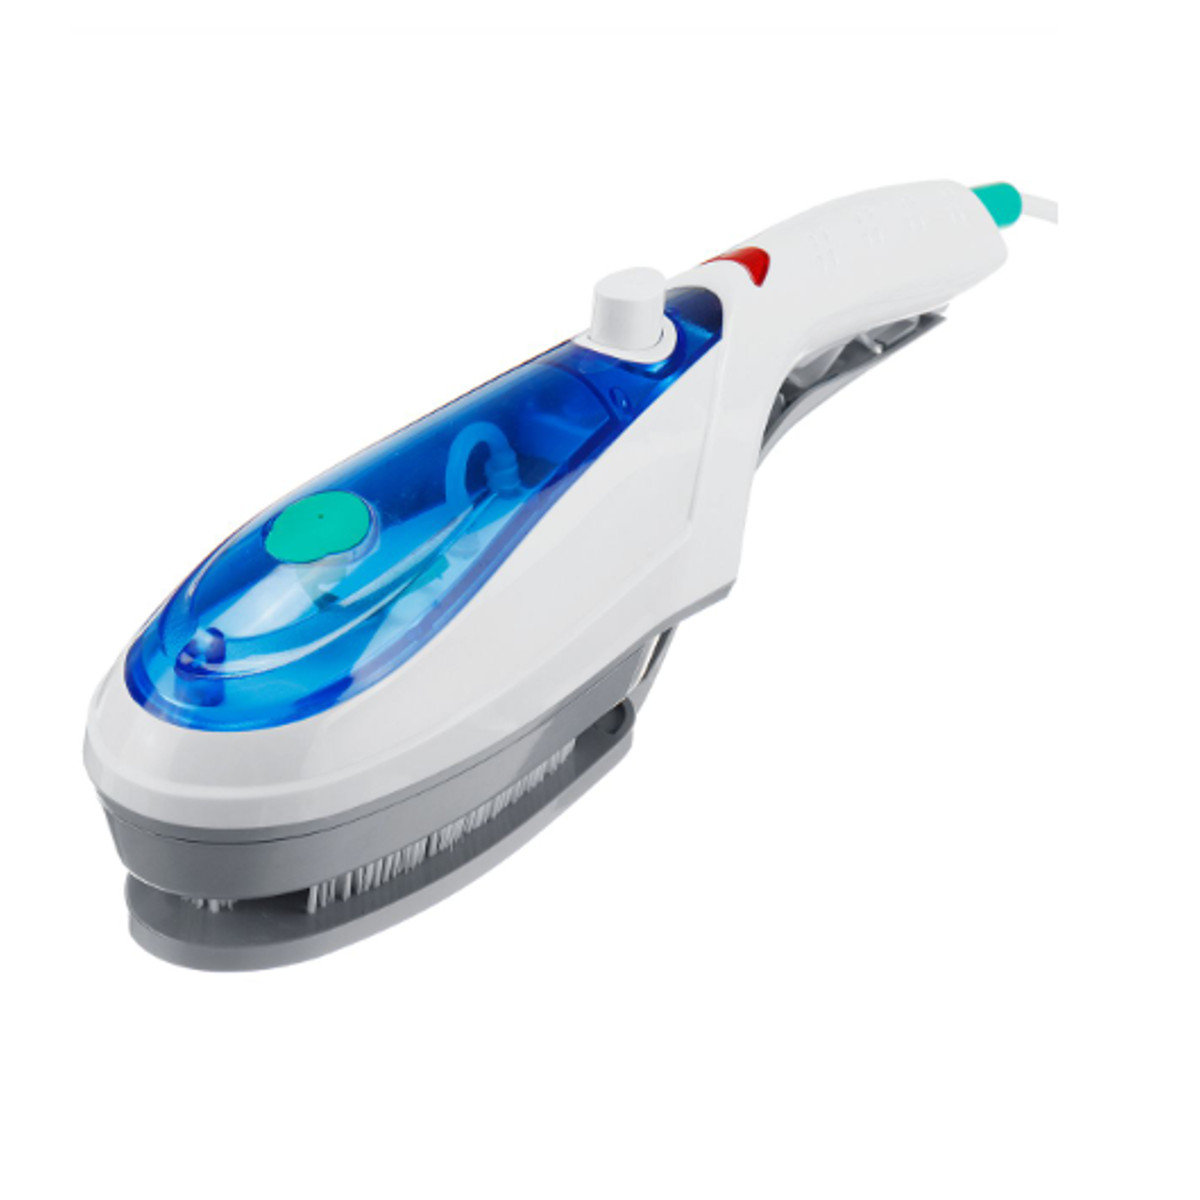 Protable-1000W-Electric-Steam-Iron-Handheld-Fabric-Laundry-Steamer-Brush-Travel-Soldering-Iron-Tips-1589841-6